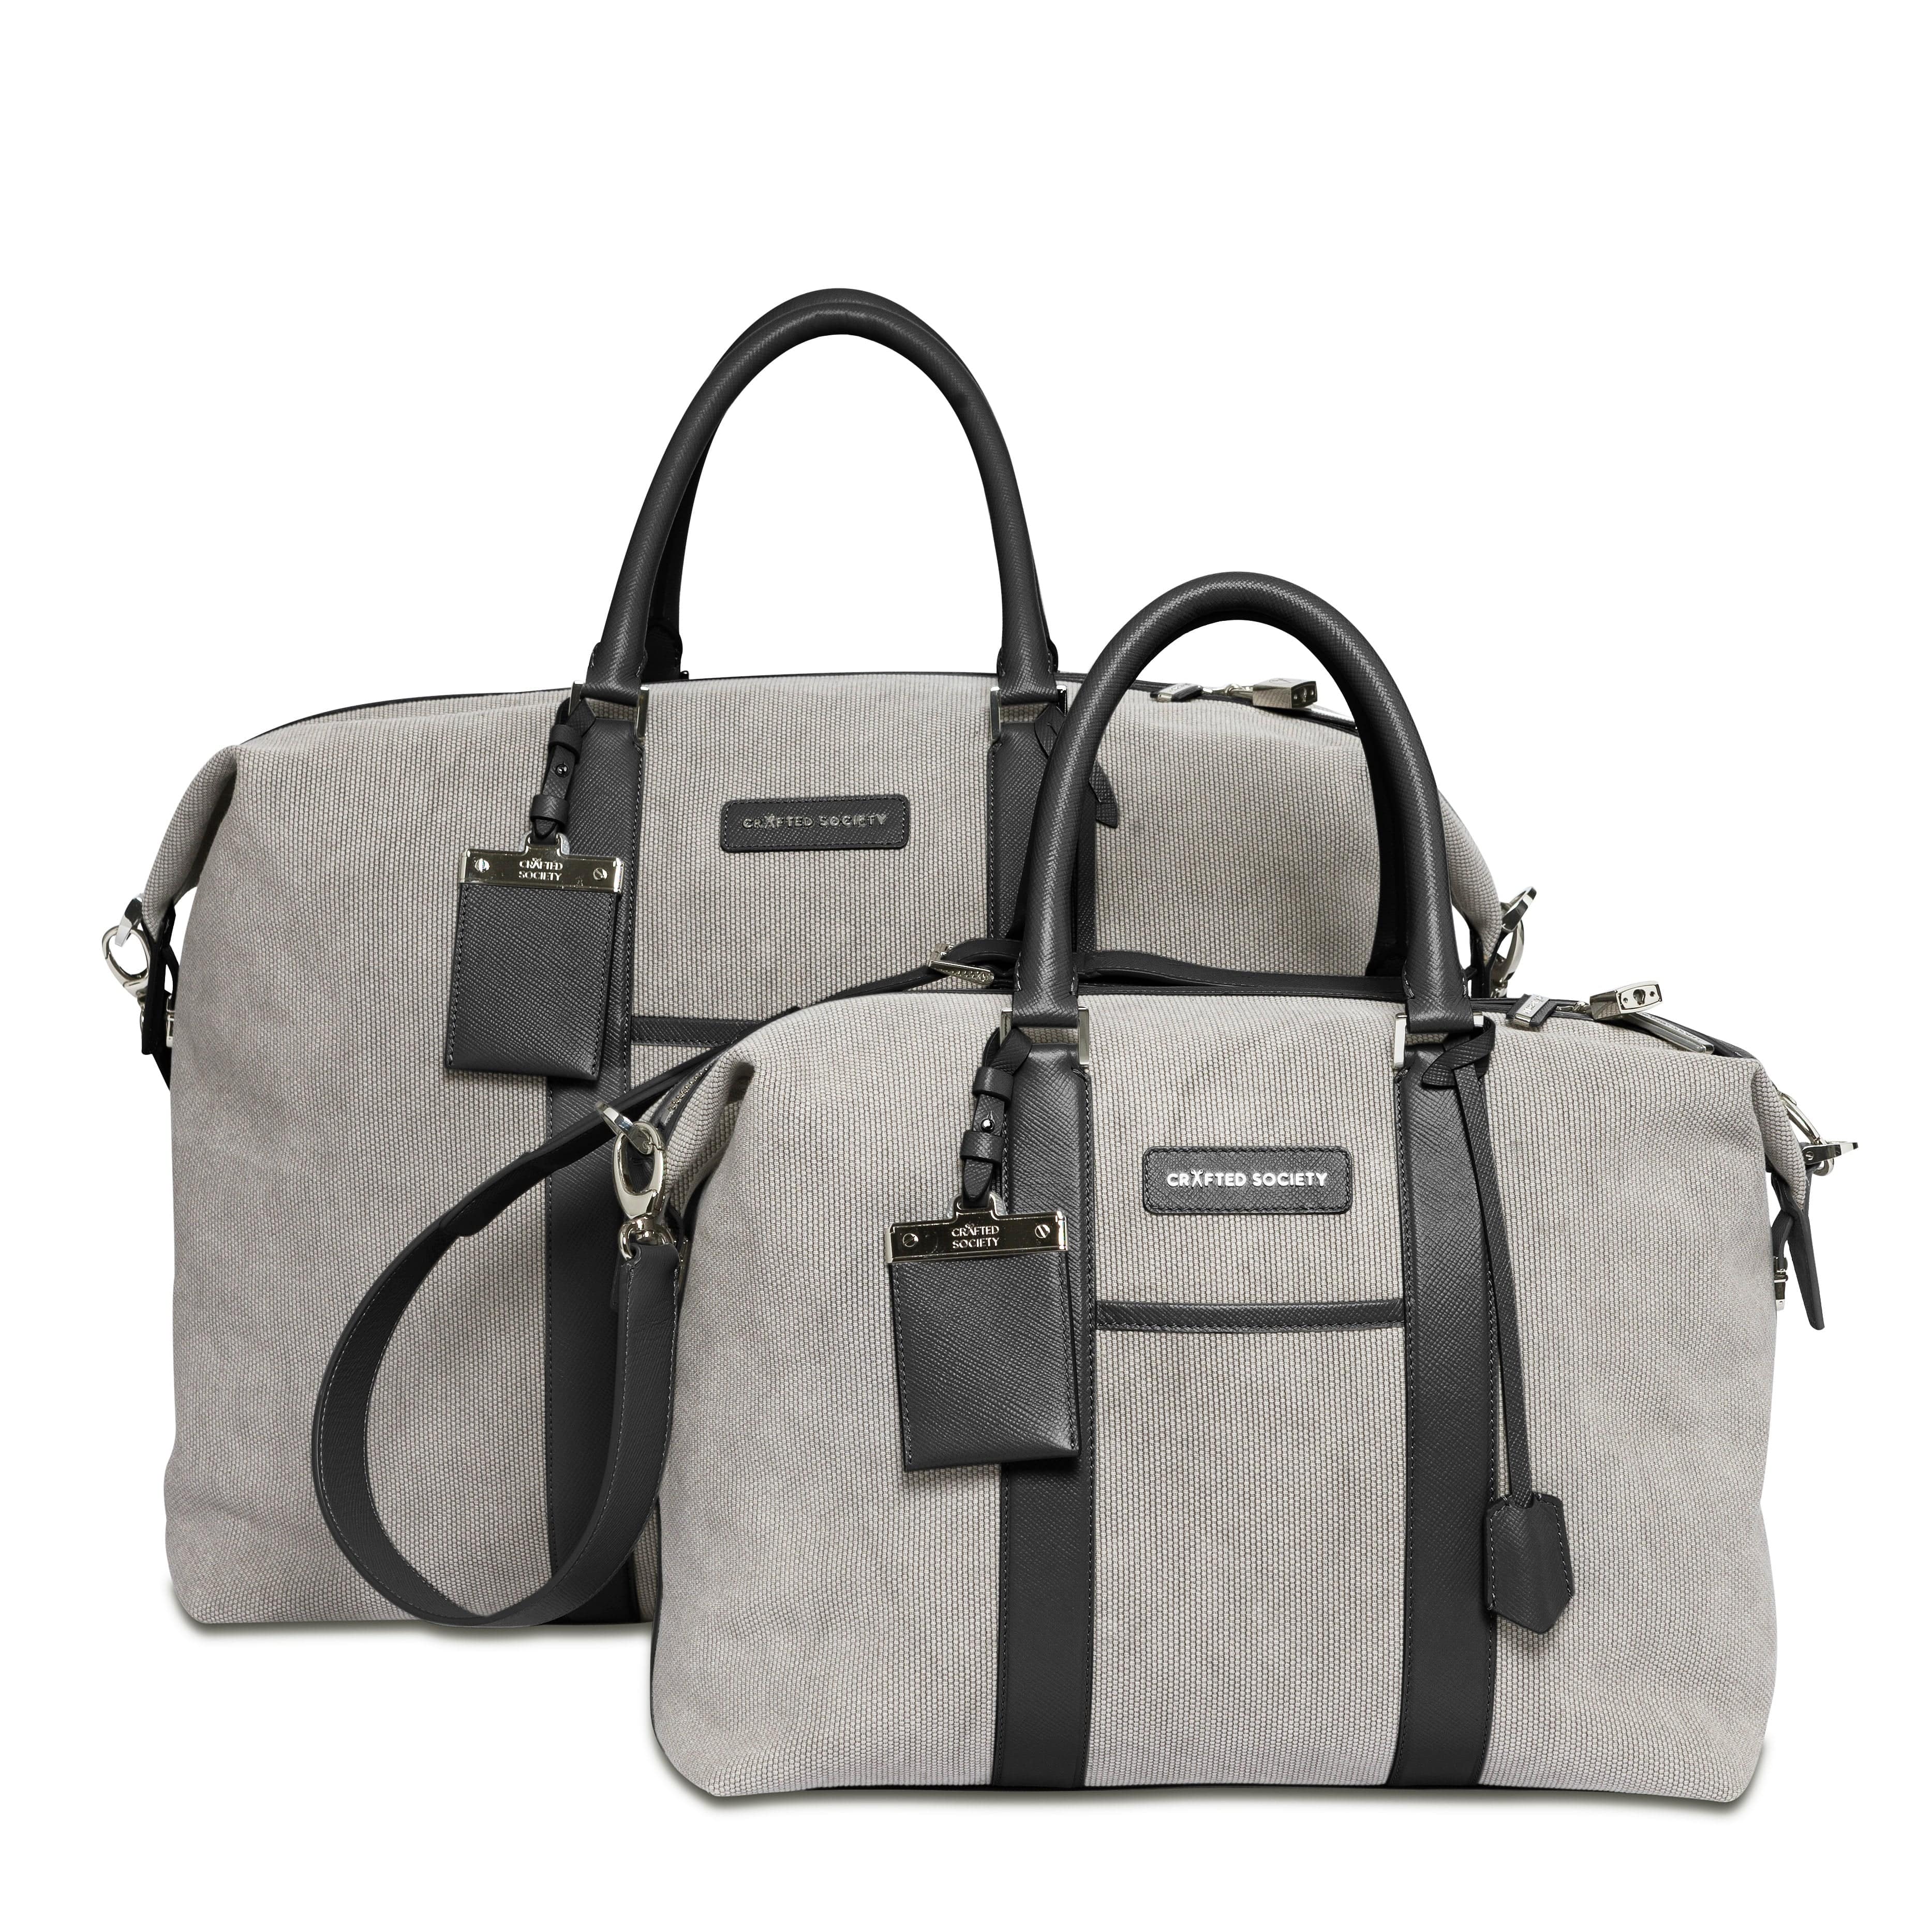 Nando Leather Weekender Bag Small - Light Grey Canvas & Black Saffiano Leather